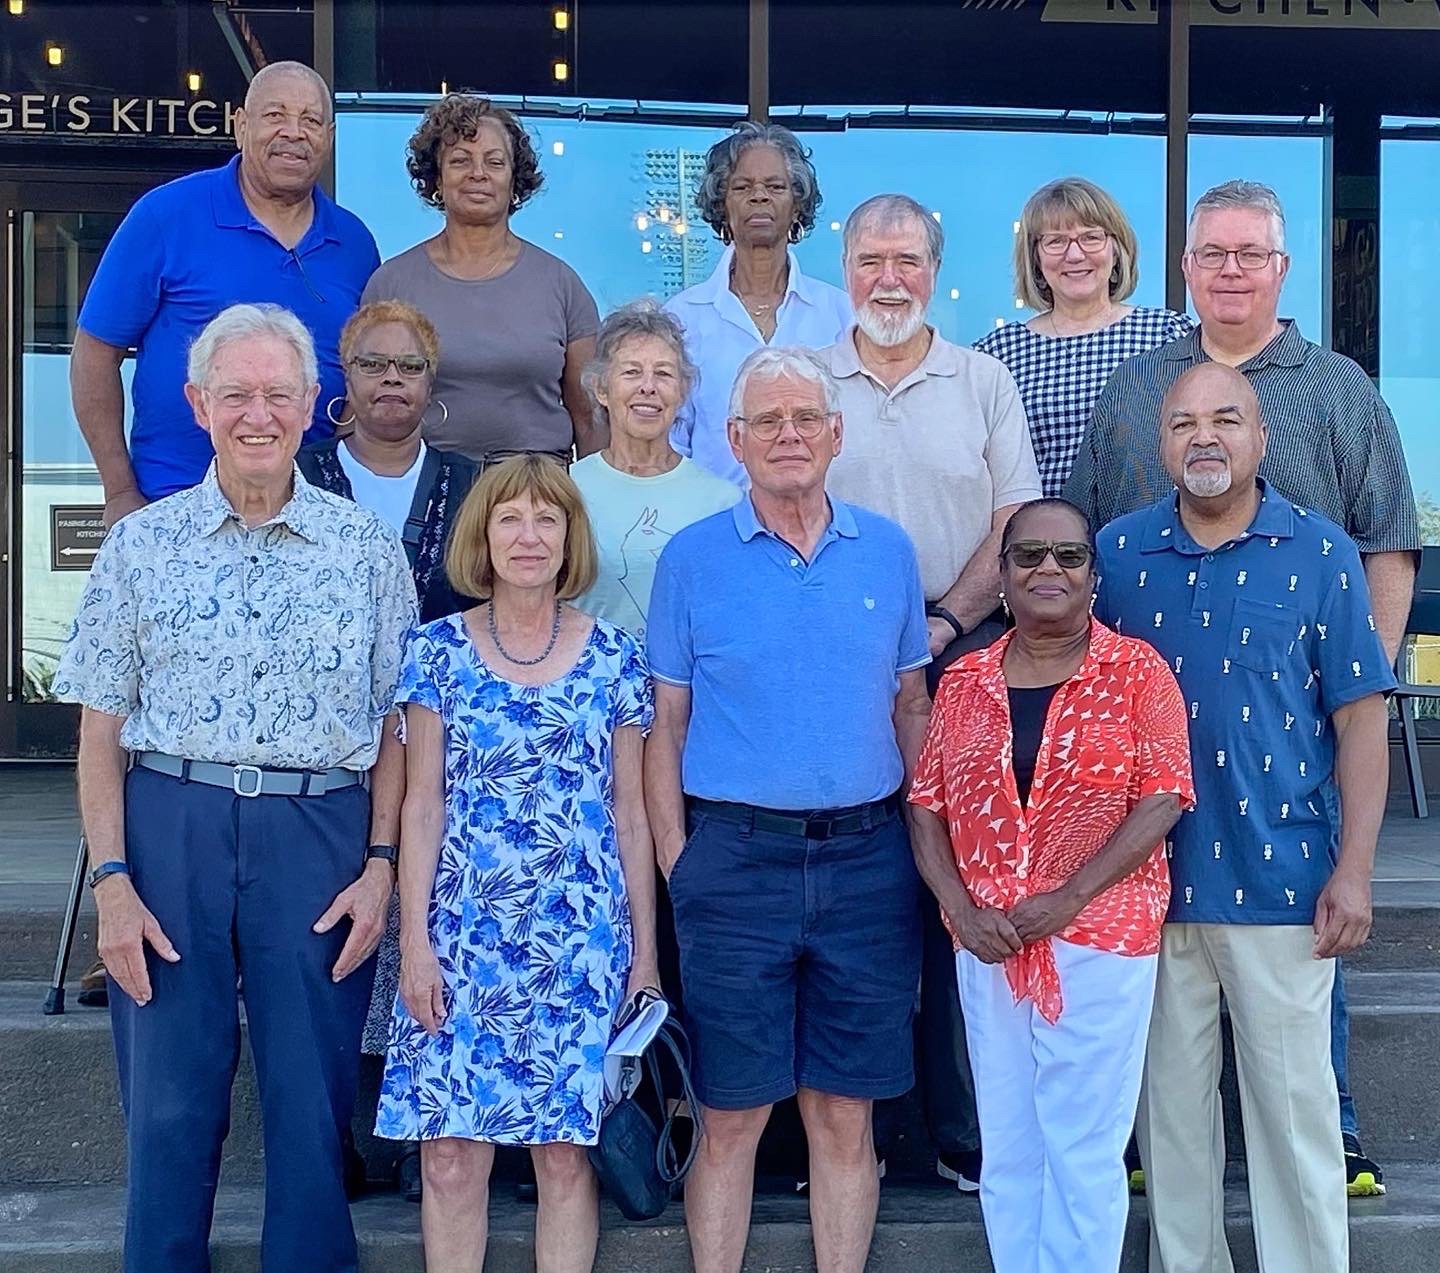 Members and friends of the Community Remembrance Coalition-Chatham, who spent time last week in Montgomery, Alabama. This photo was taken just outside the EJI's Legacy Museum, built on what used to be one of the city's most prominent slave auction spaces.